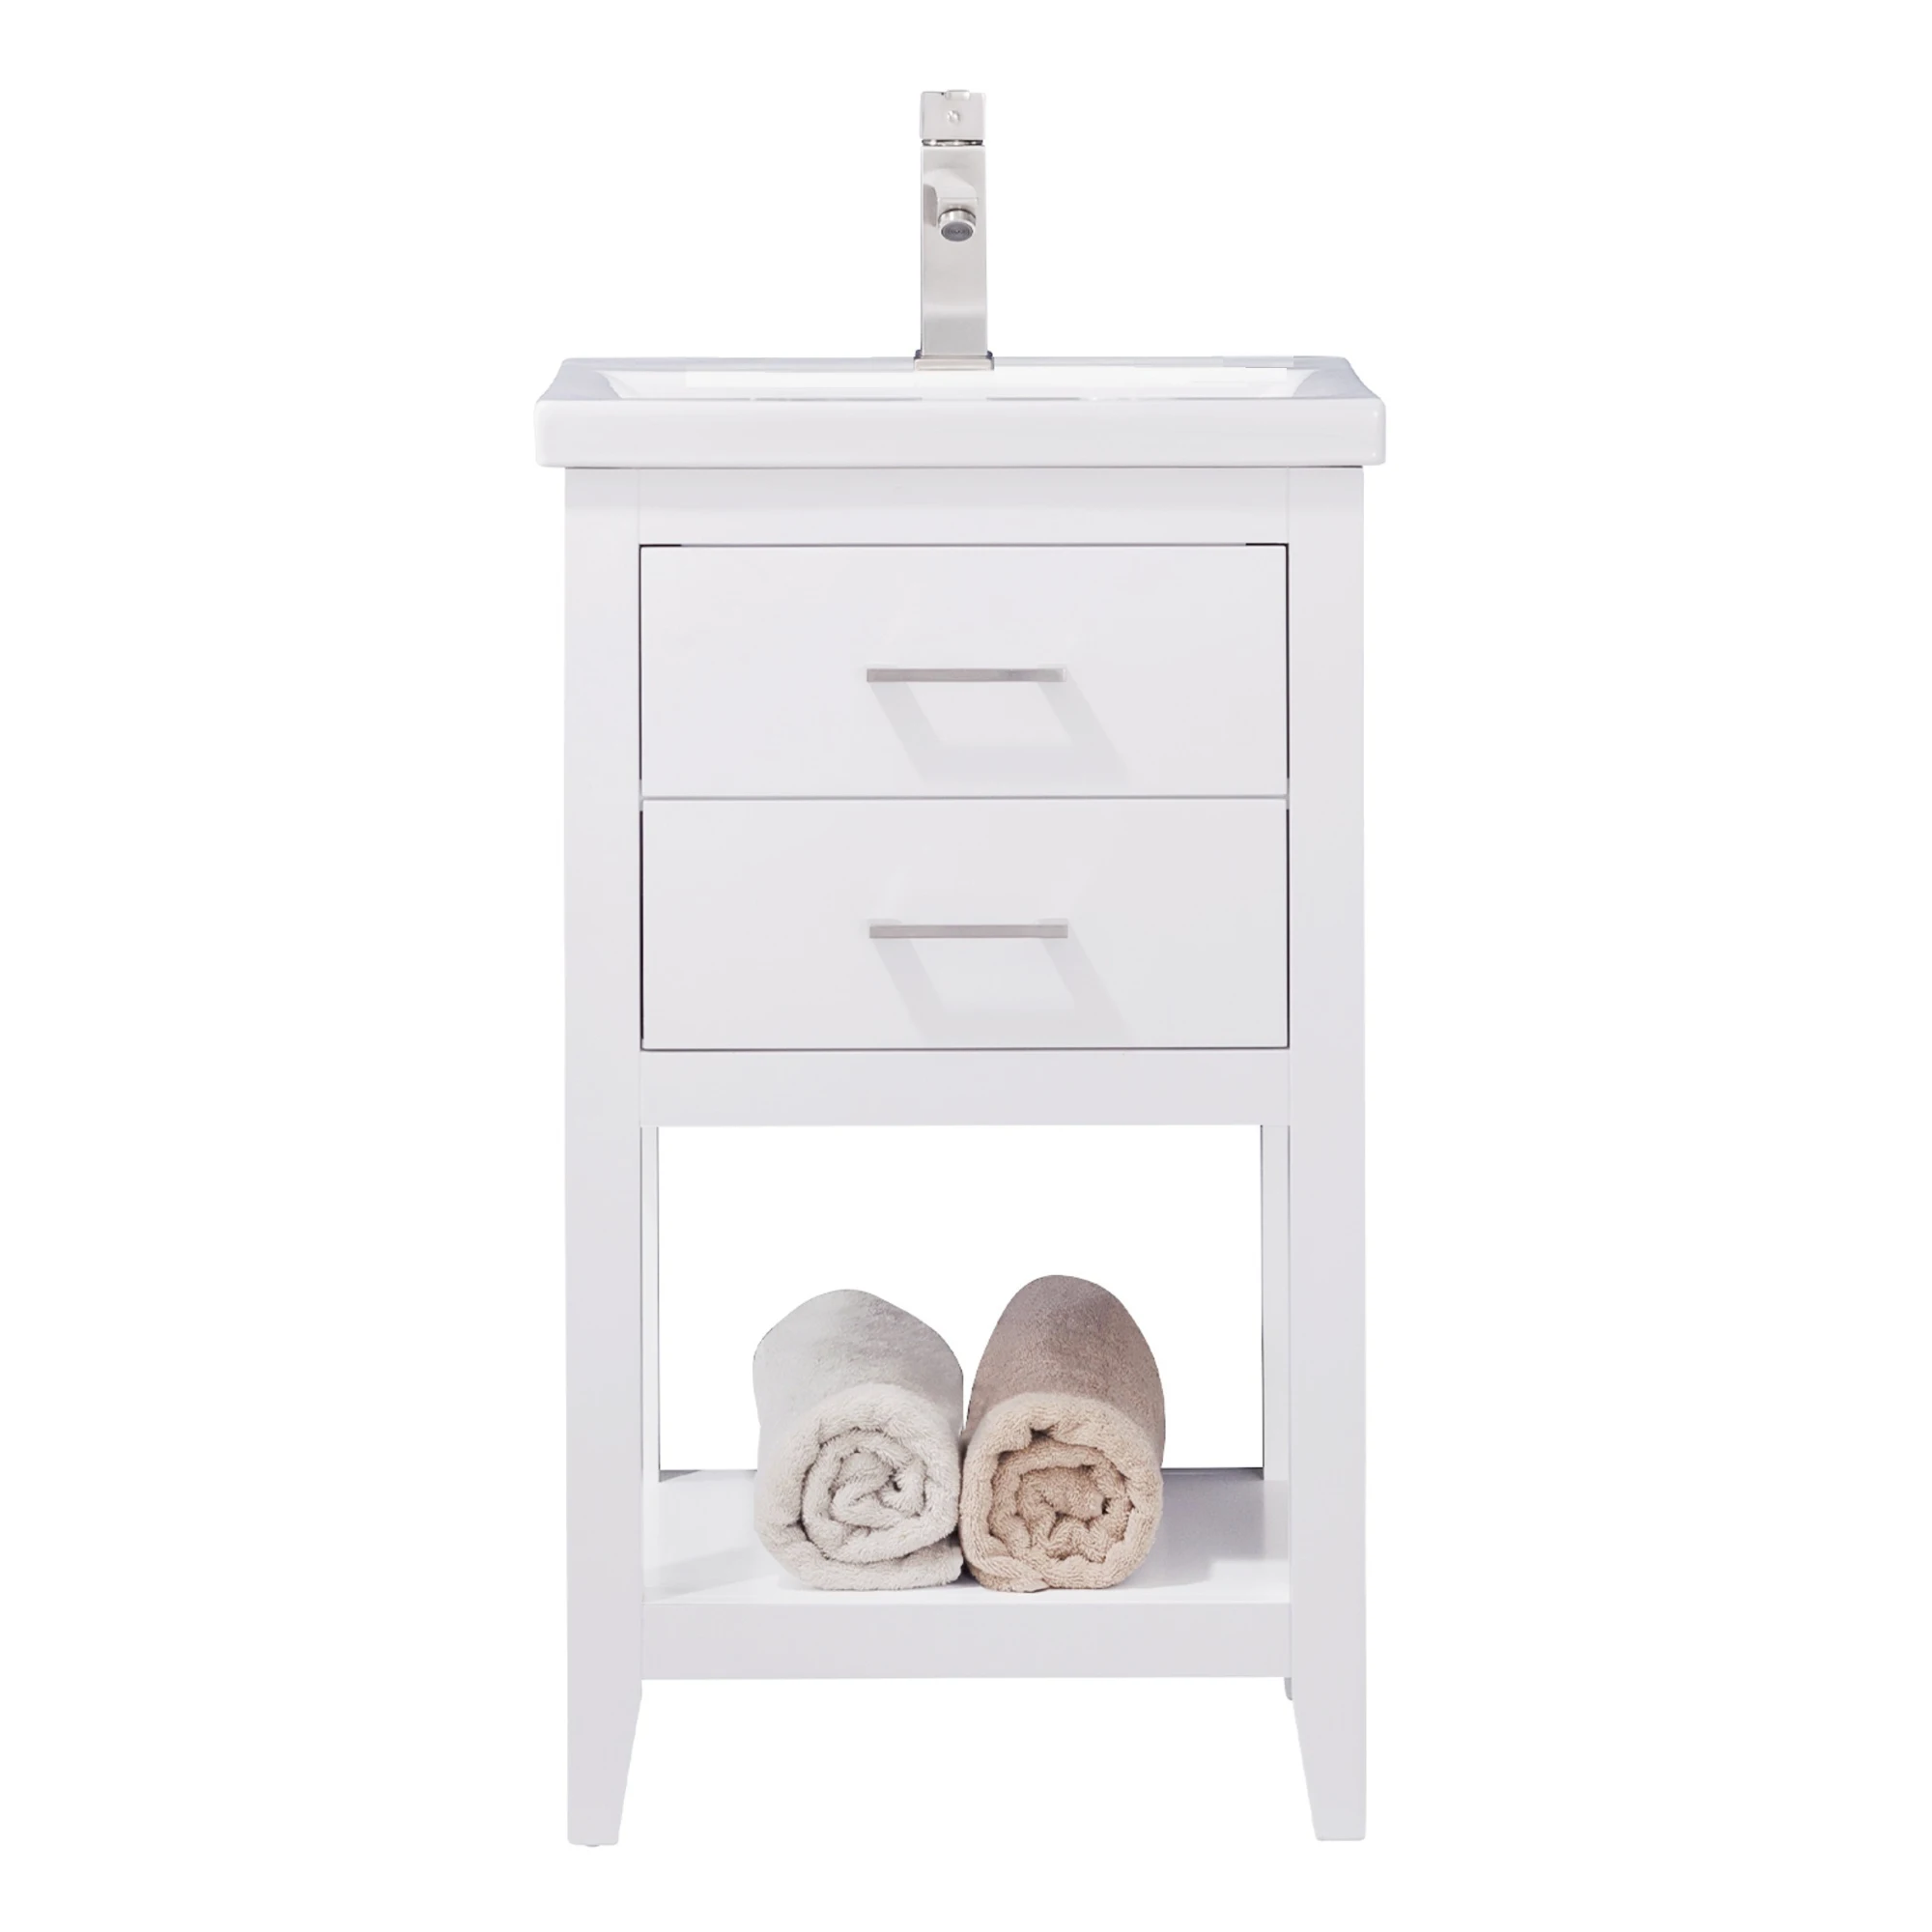 Design Element Cara 20 Single Sink Vanity In White Made With Solid Hardwood And Ceramic Undermount Sink Buy Bathroom Vanity Wholesale Bathroom Vanity Custom Cabinet Usa Product On Alibaba Com